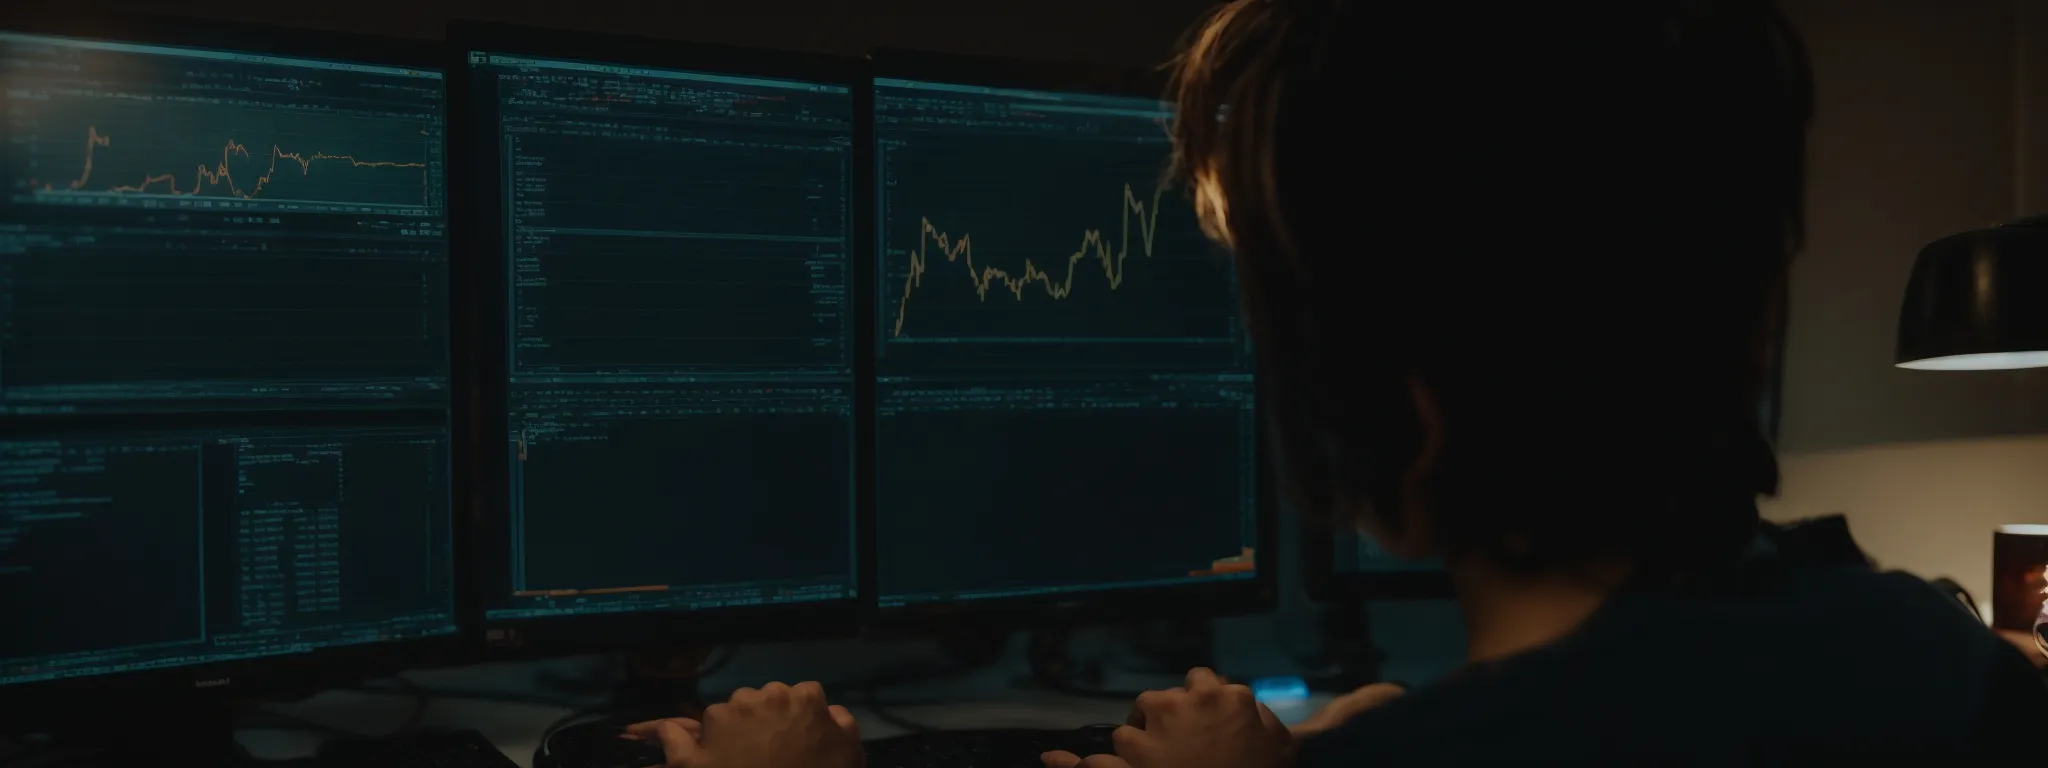 a webmaster intently examining intricate analytics charts on a computer monitor, reflecting a thorough seo audit in progress.